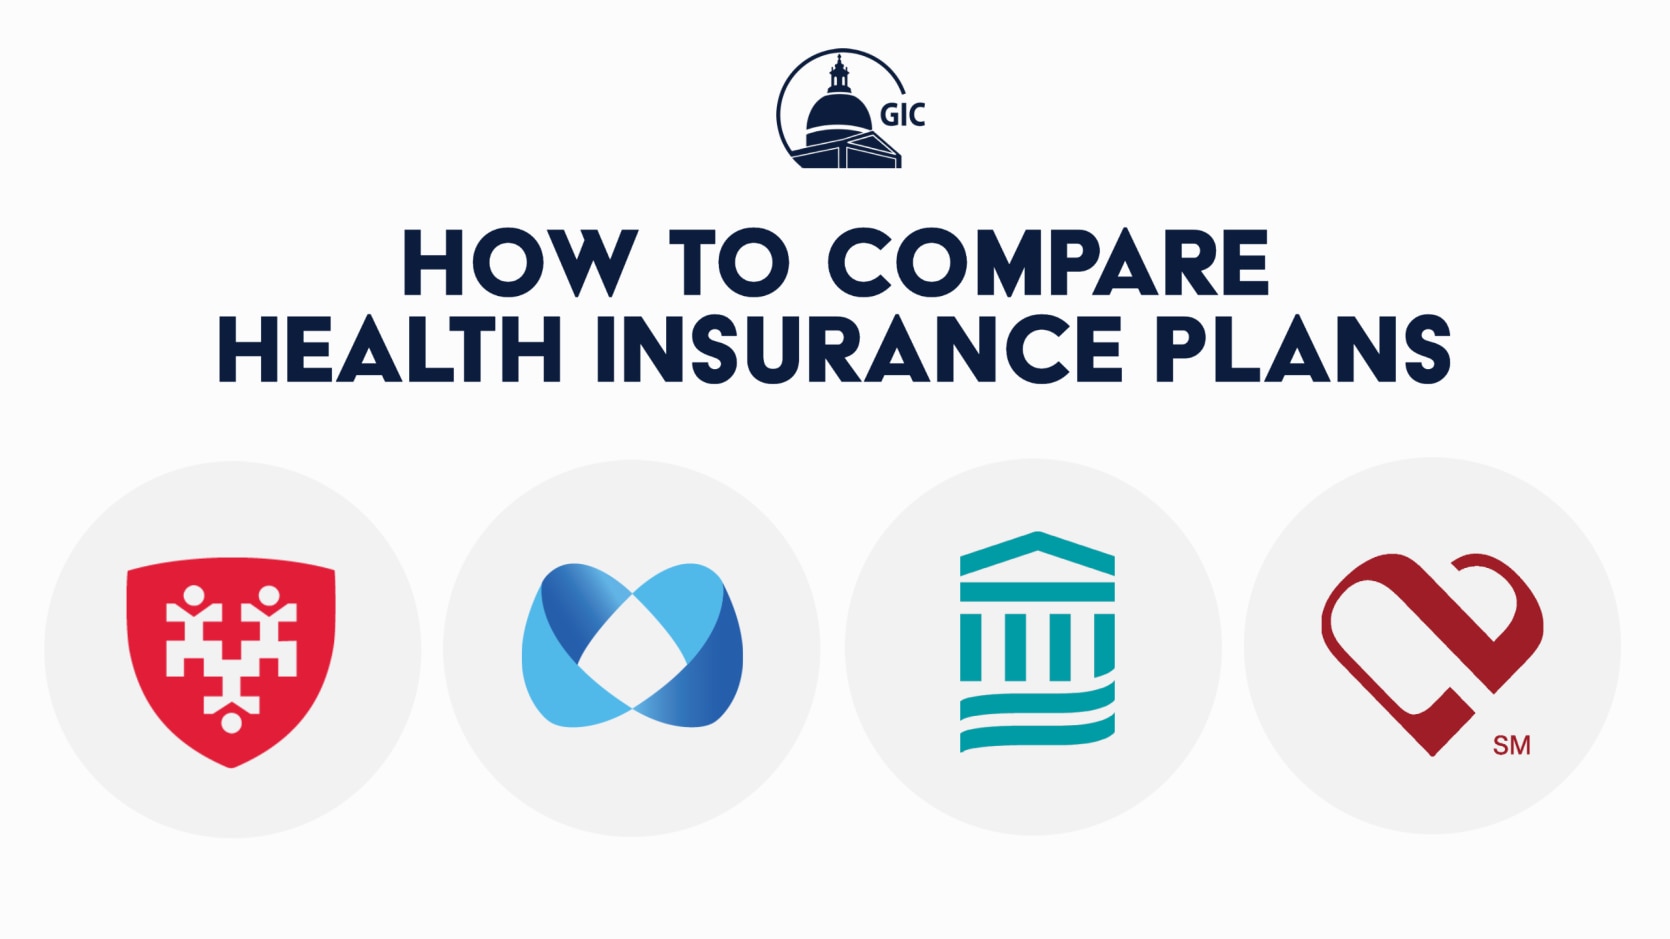 How to Compare Health Insurance Plans